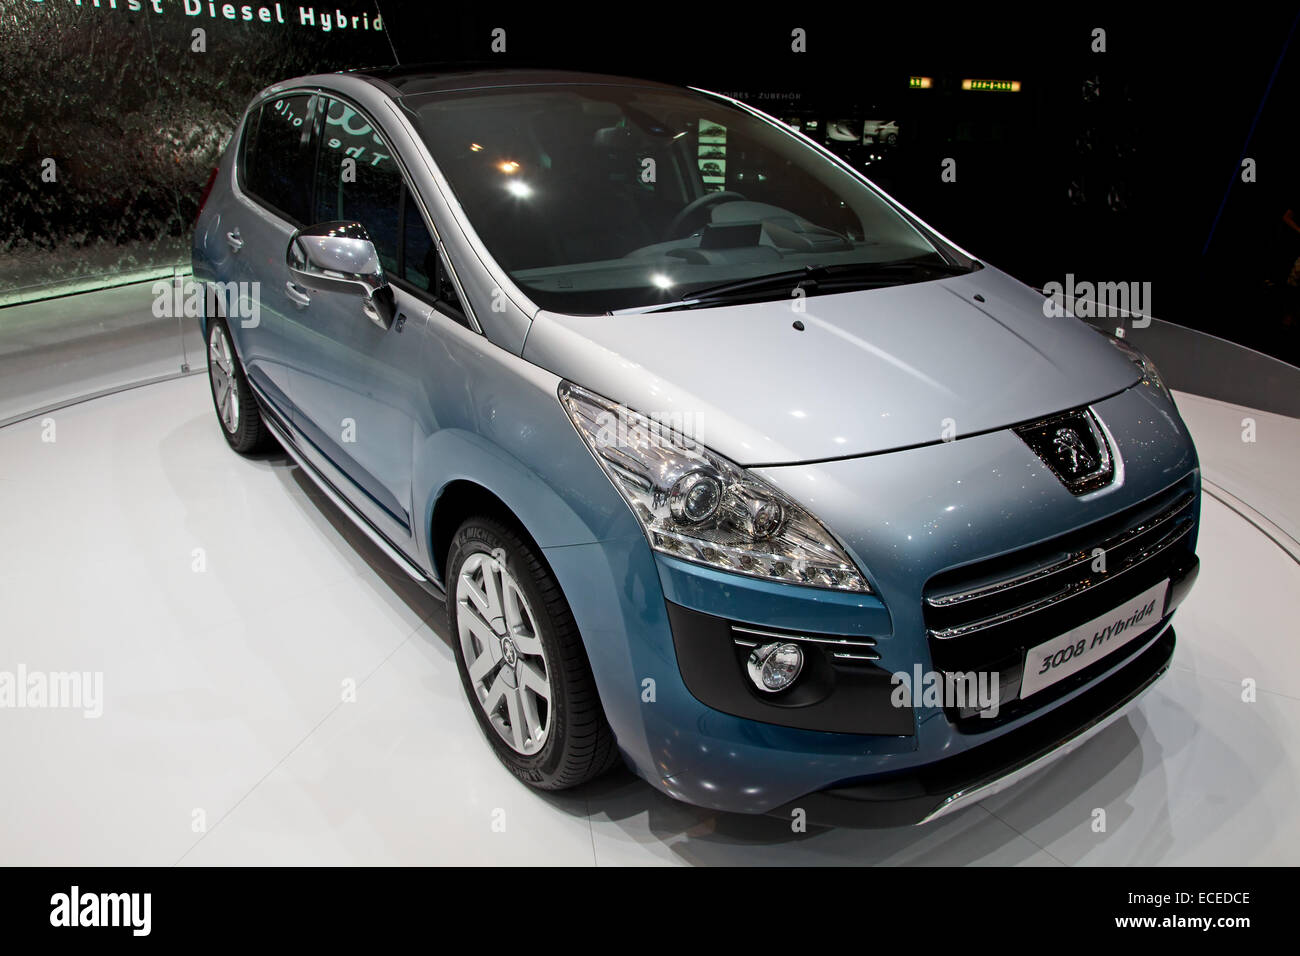 GENEVA - MARCH 8: The Peugeot 3008 Hybrid car on display at the